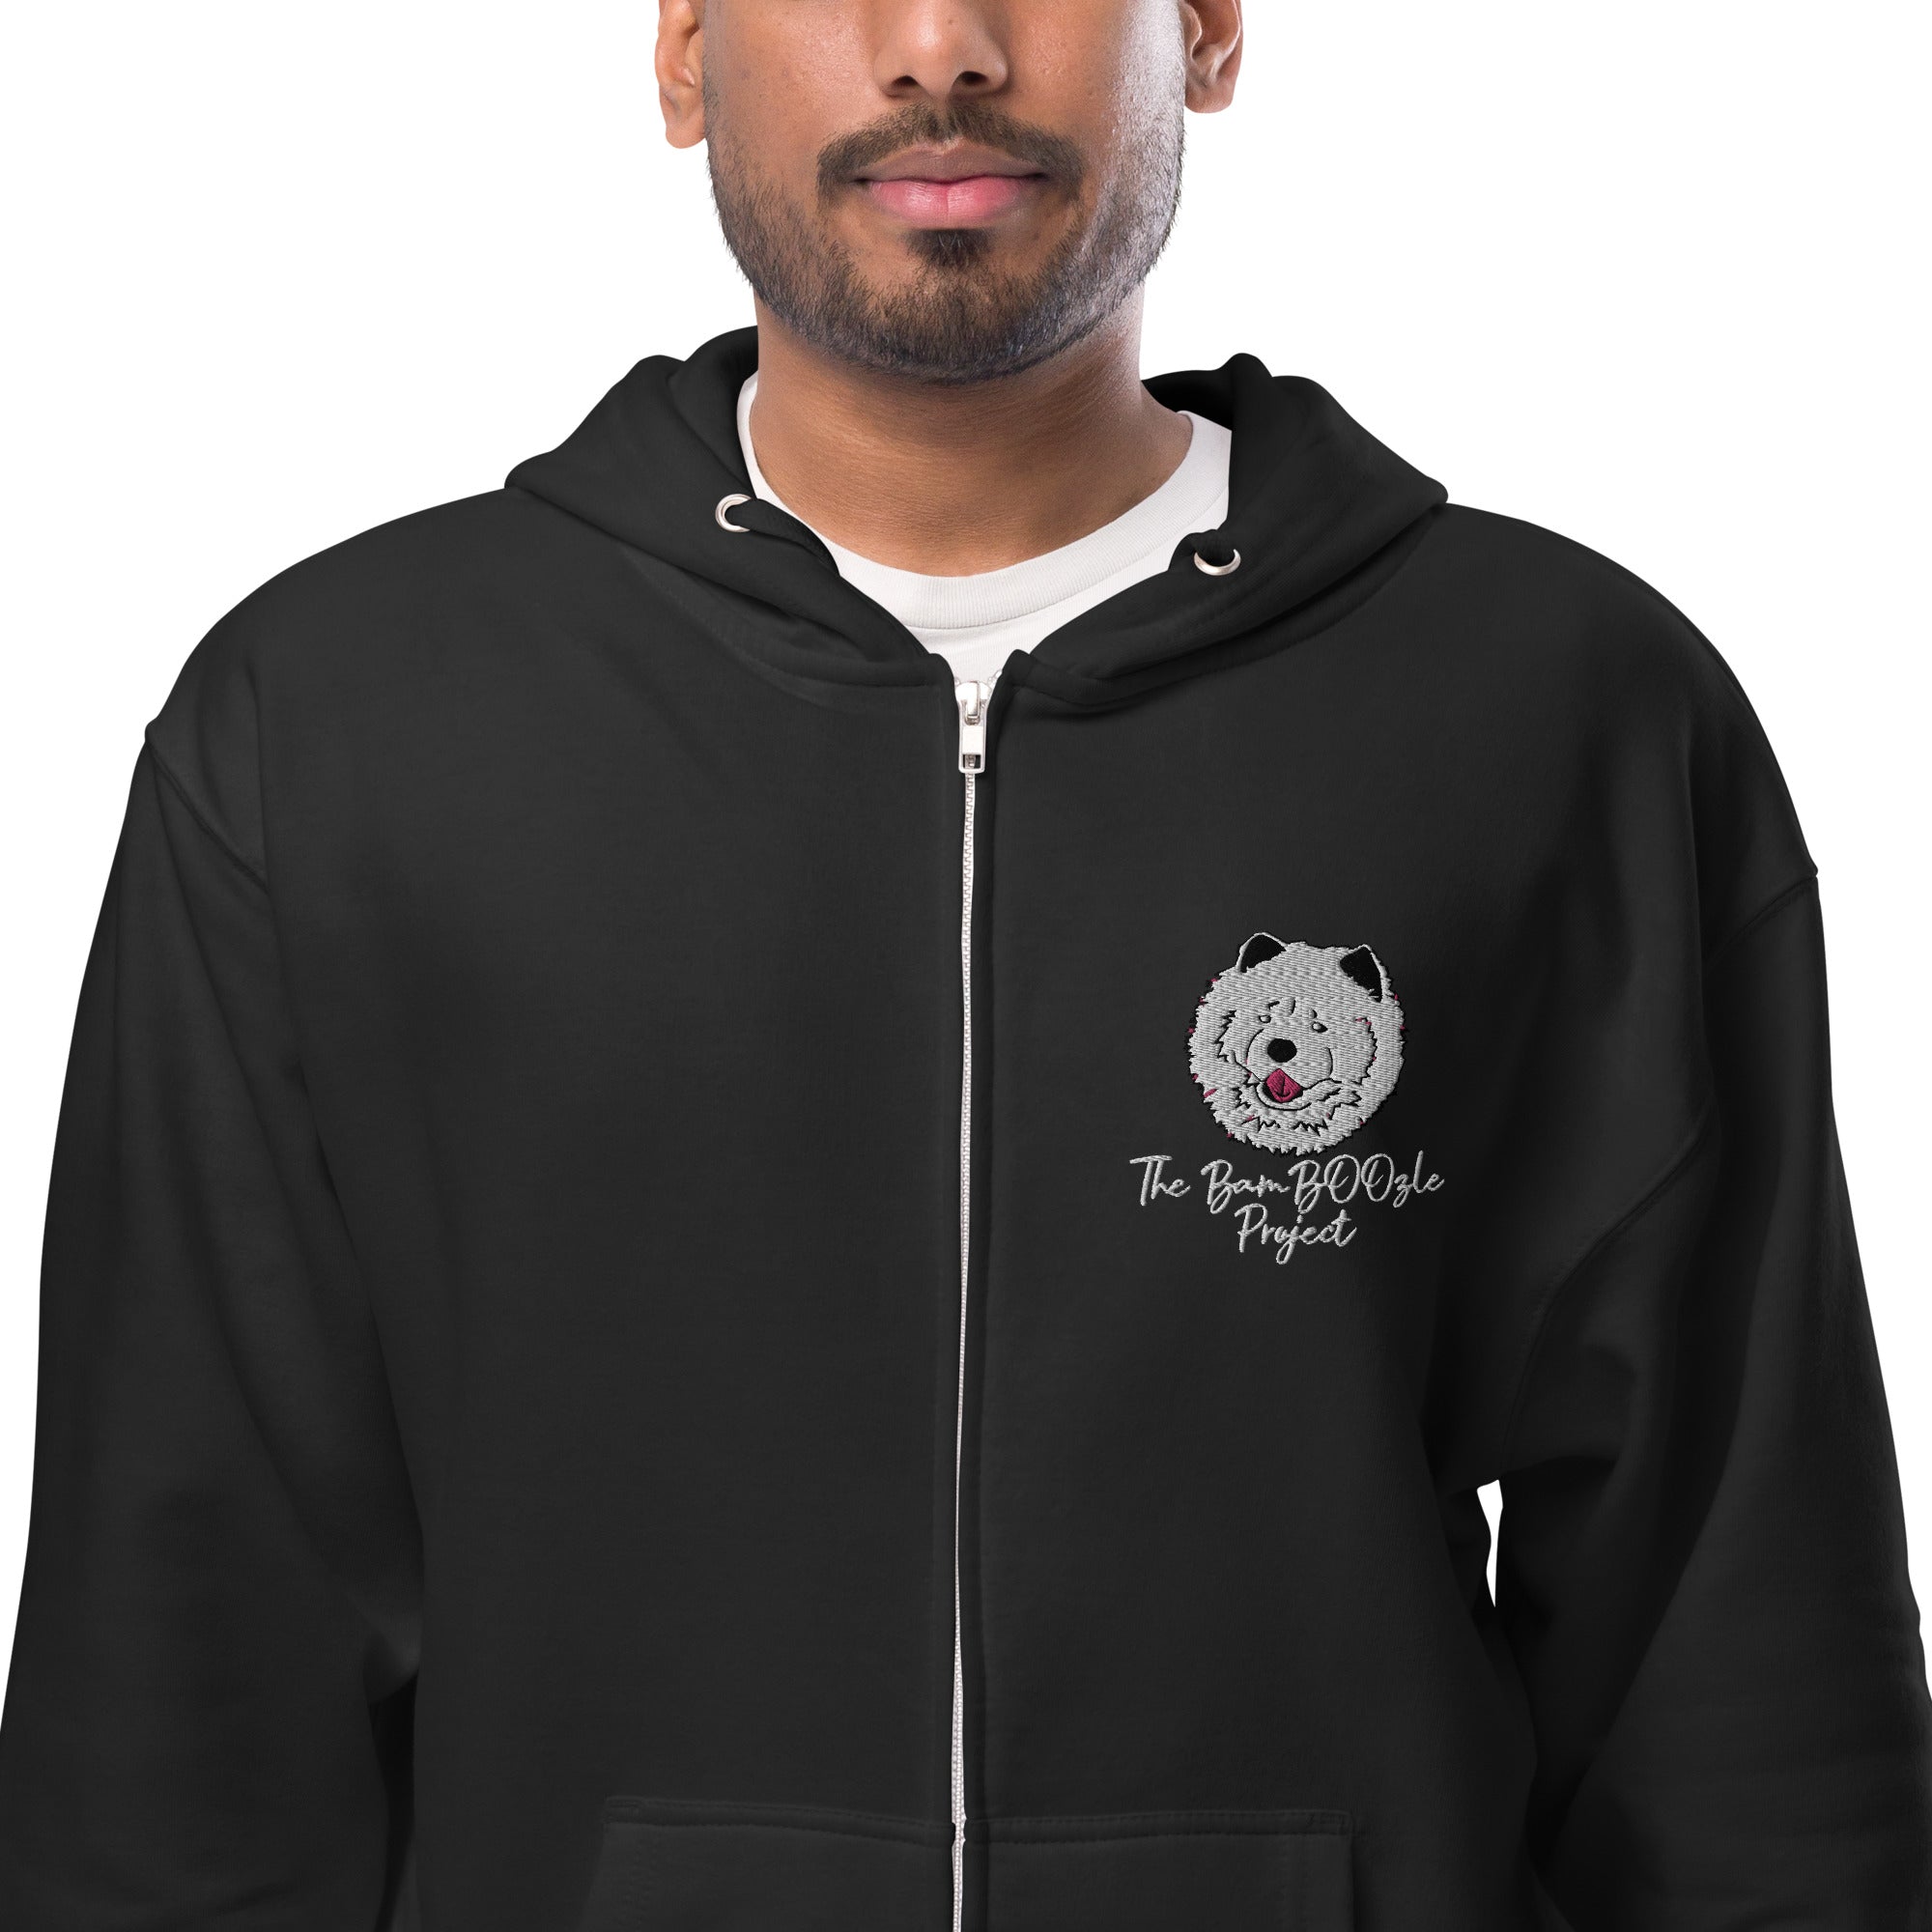 Chimmie Chow Embroidered Unisex Fleece Zip Up Hoodie